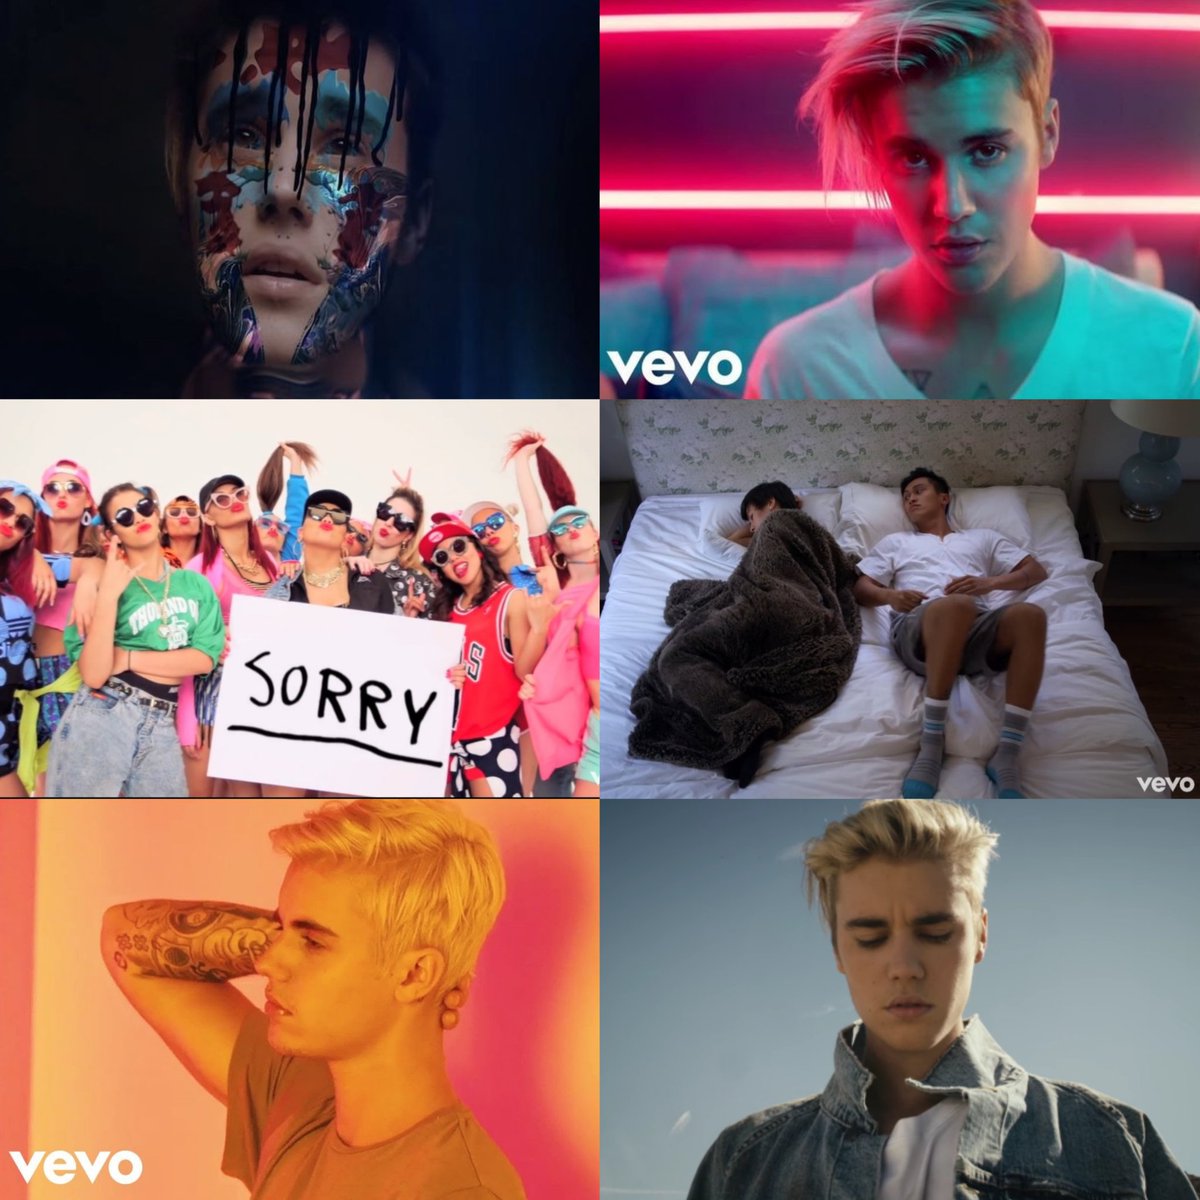 pov: it's 2015 and justin bieber ruled the year